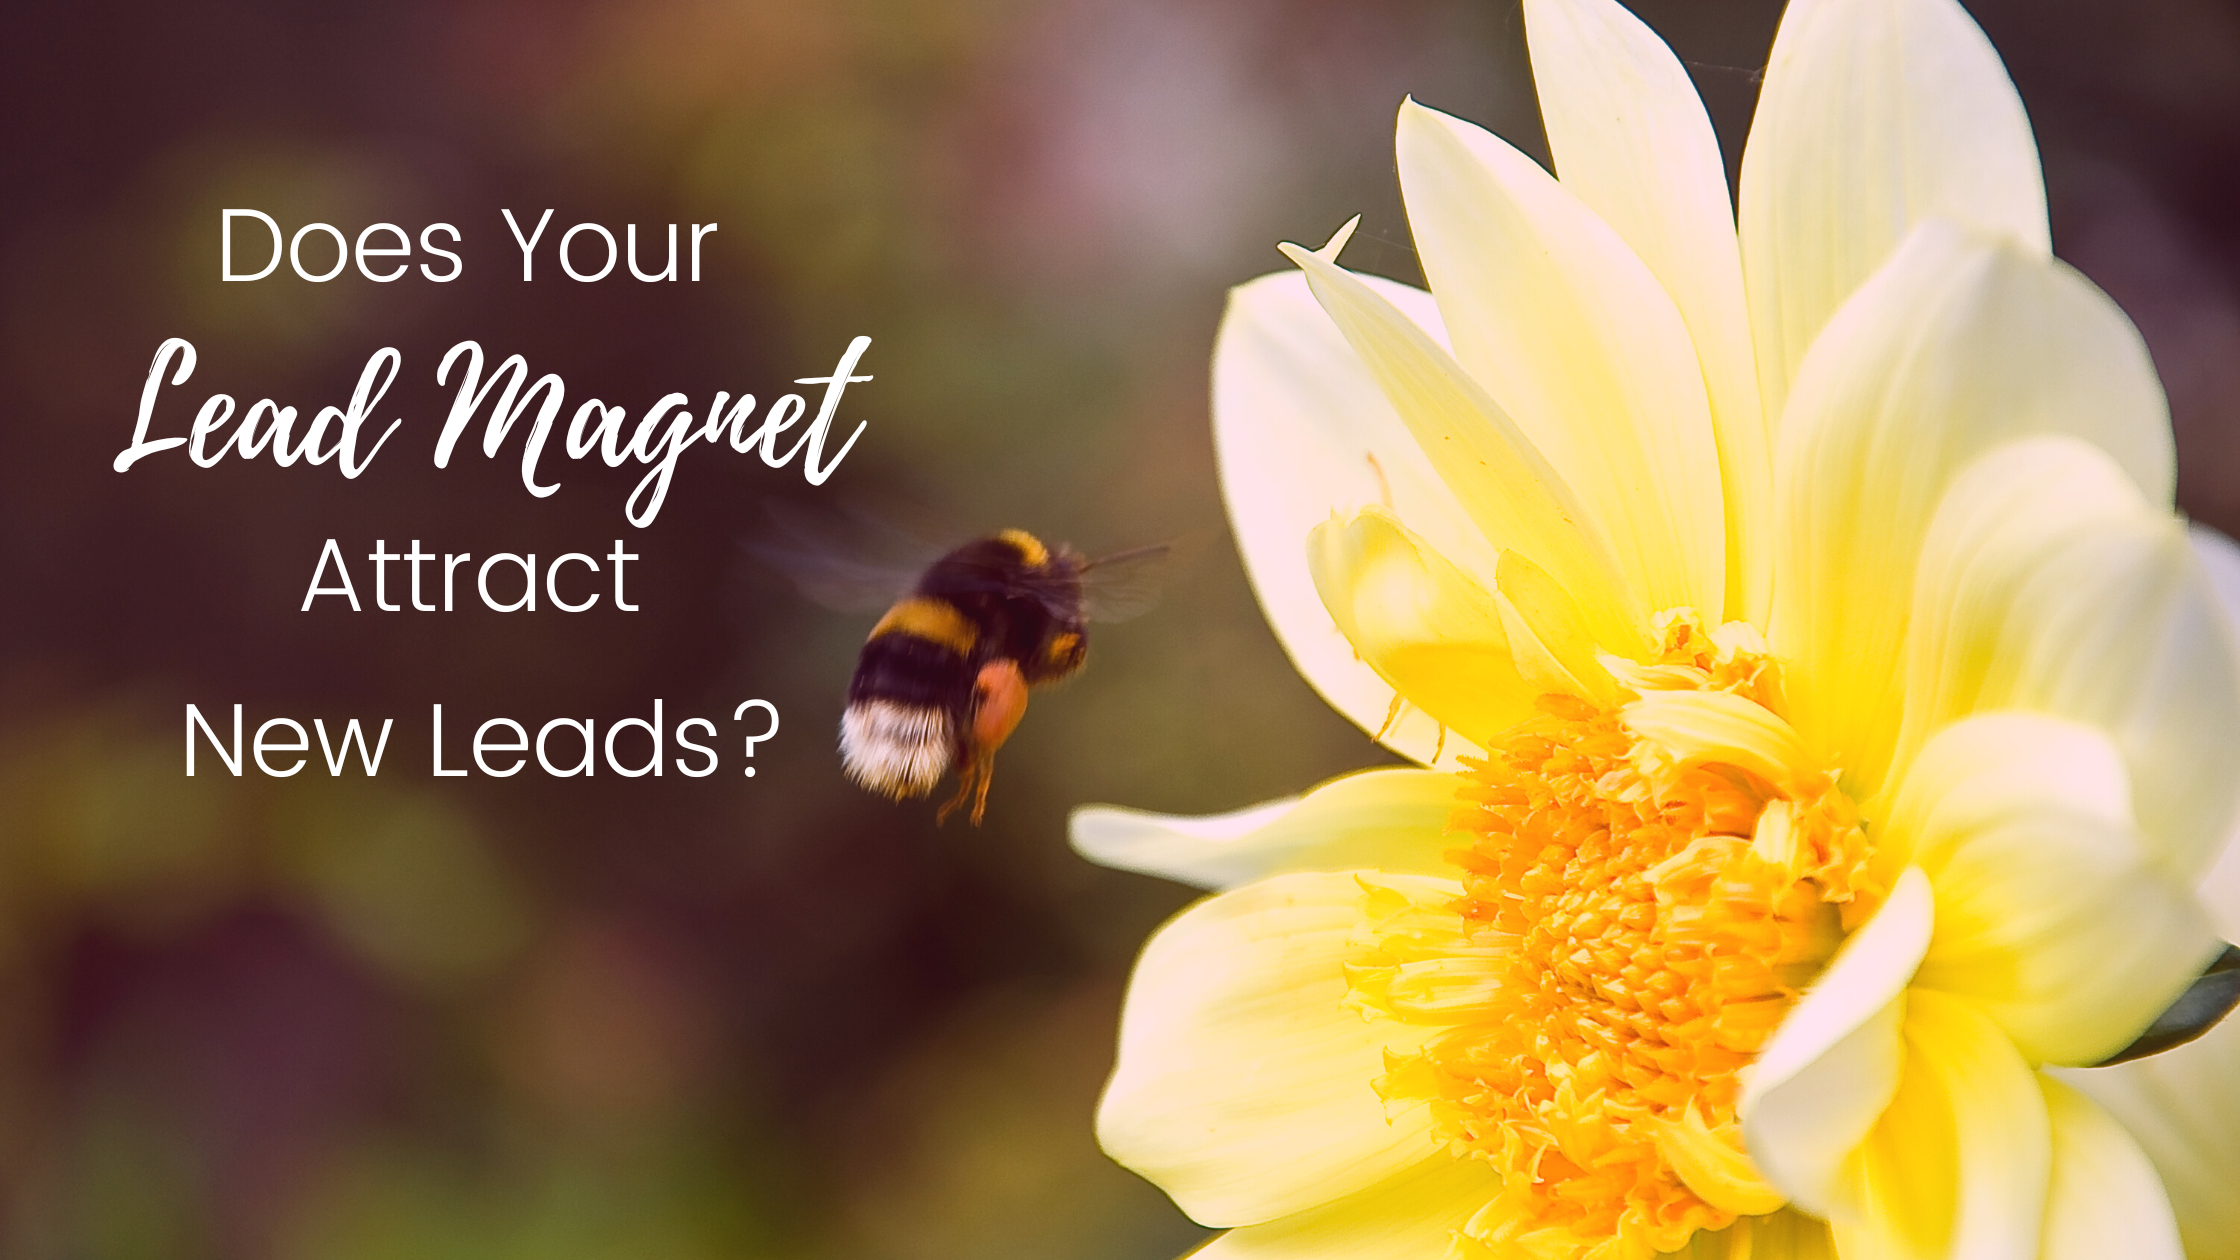 Is Your Lead Magnet Attracting New Leads?